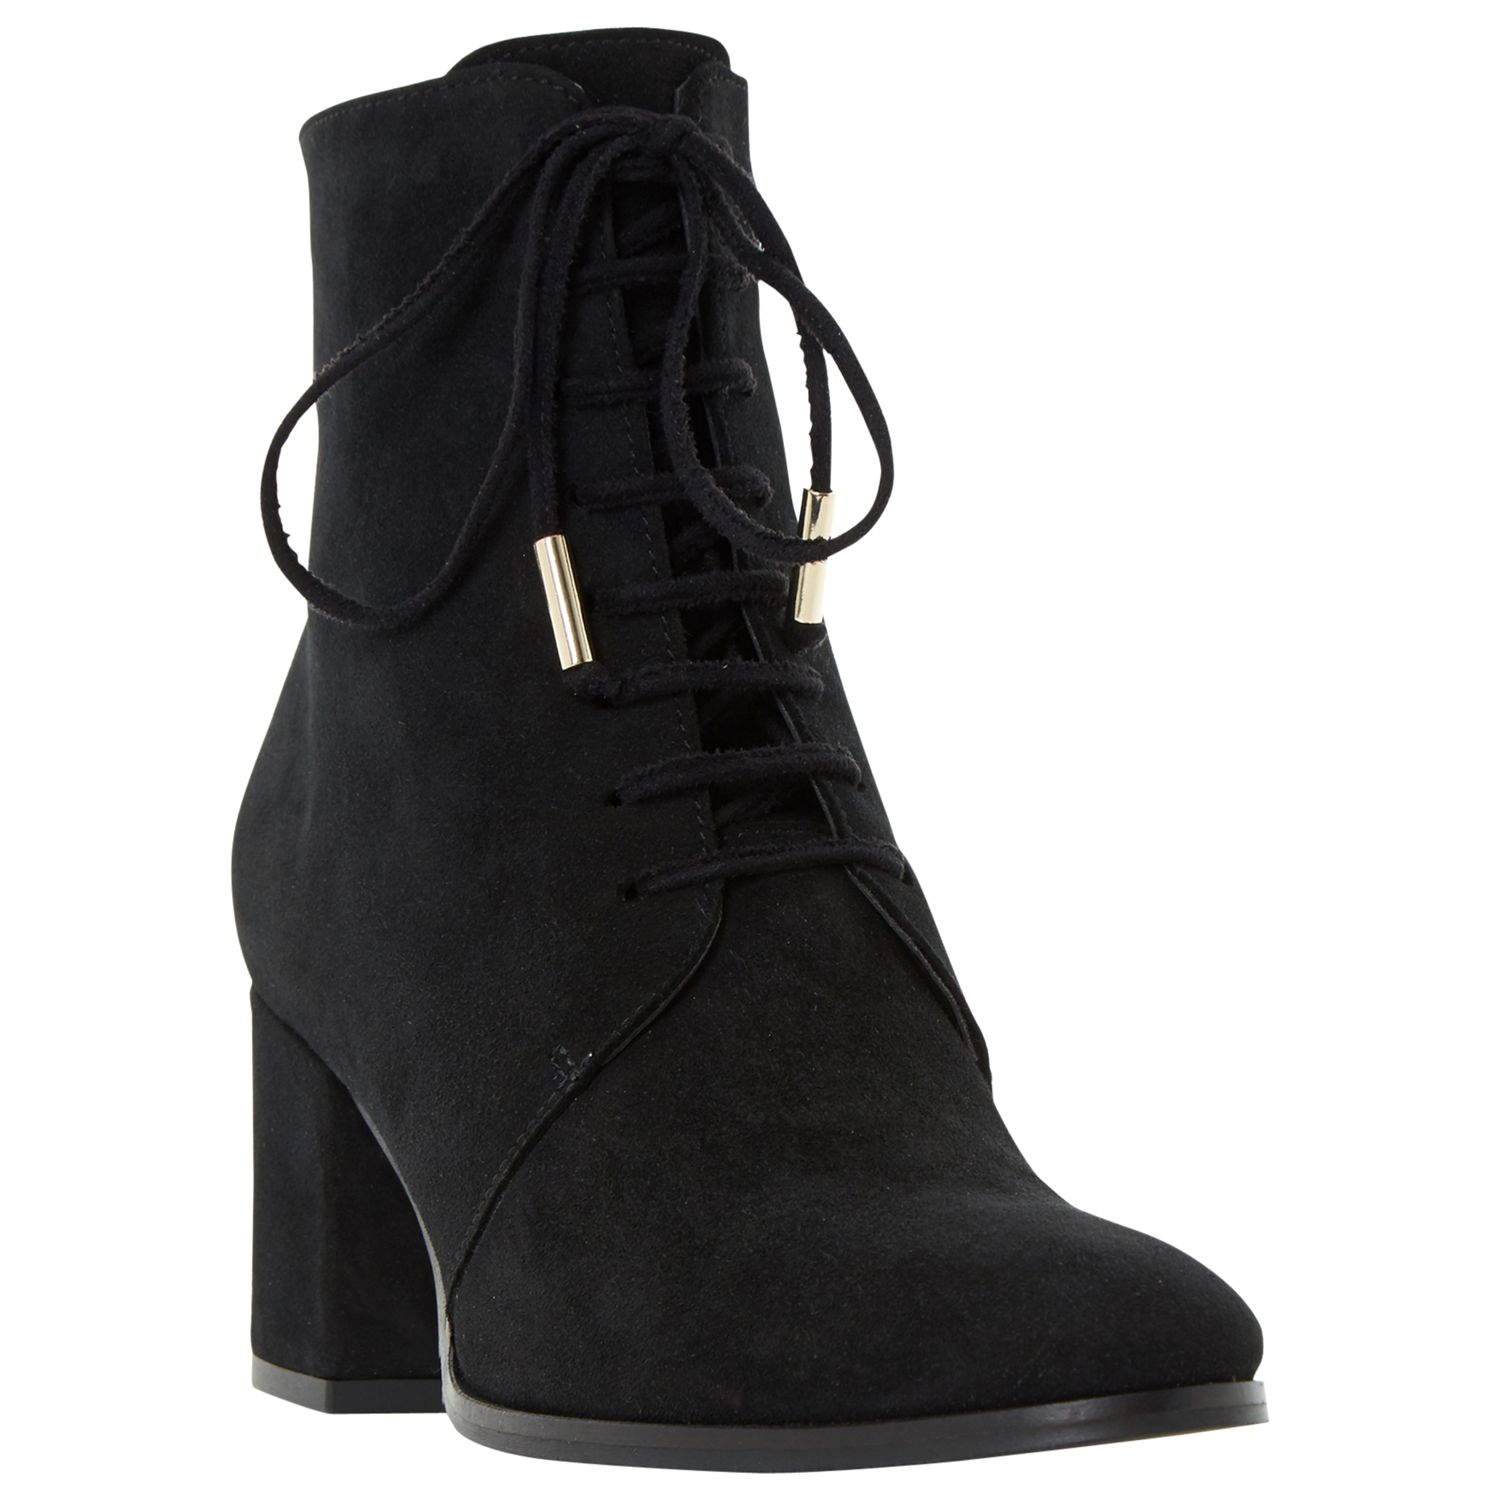 Dune Olita Lace Up Ankle Boots, Black, 7